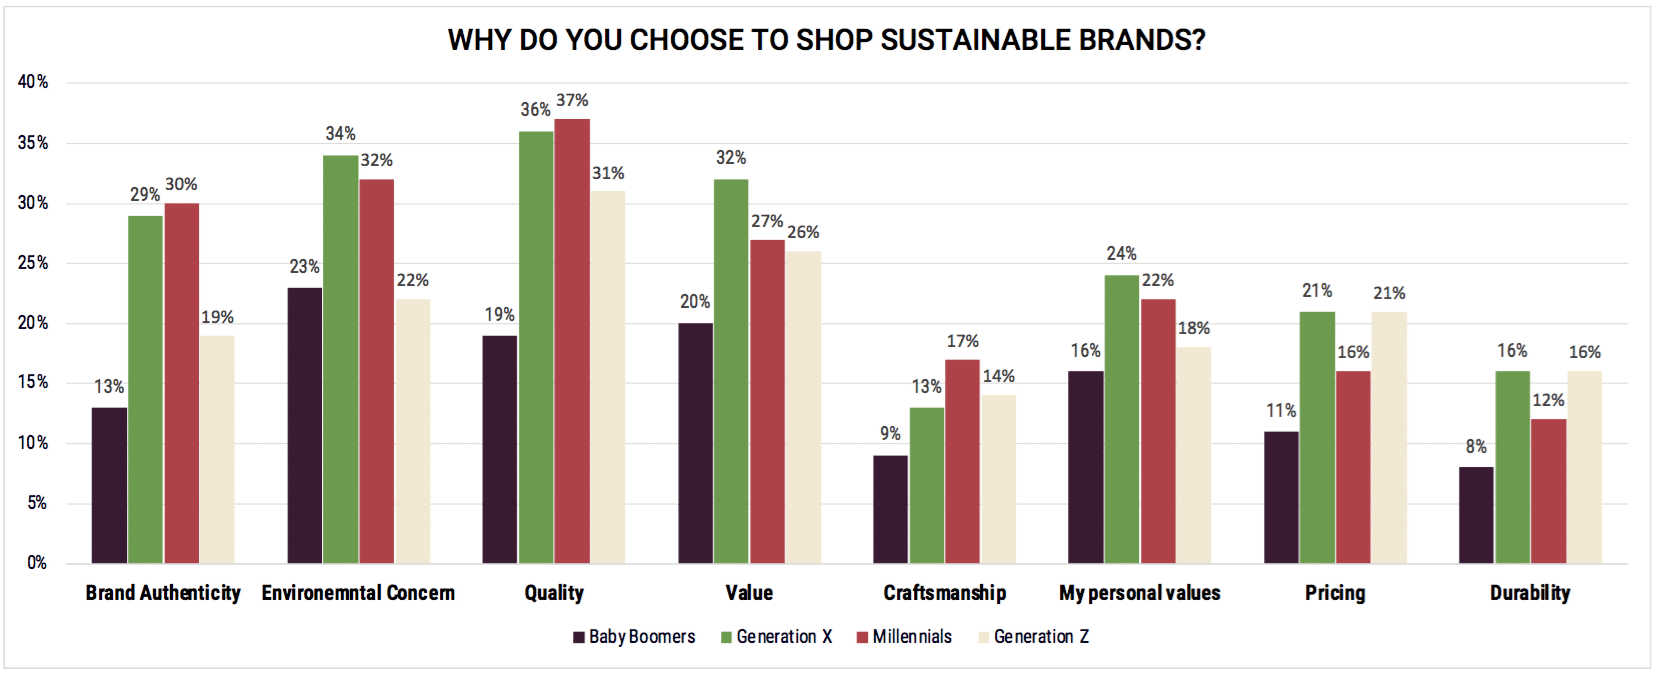 Gen Zers and millennials are more likely to purchase from sustainable brands than baby boomers or Gen X.